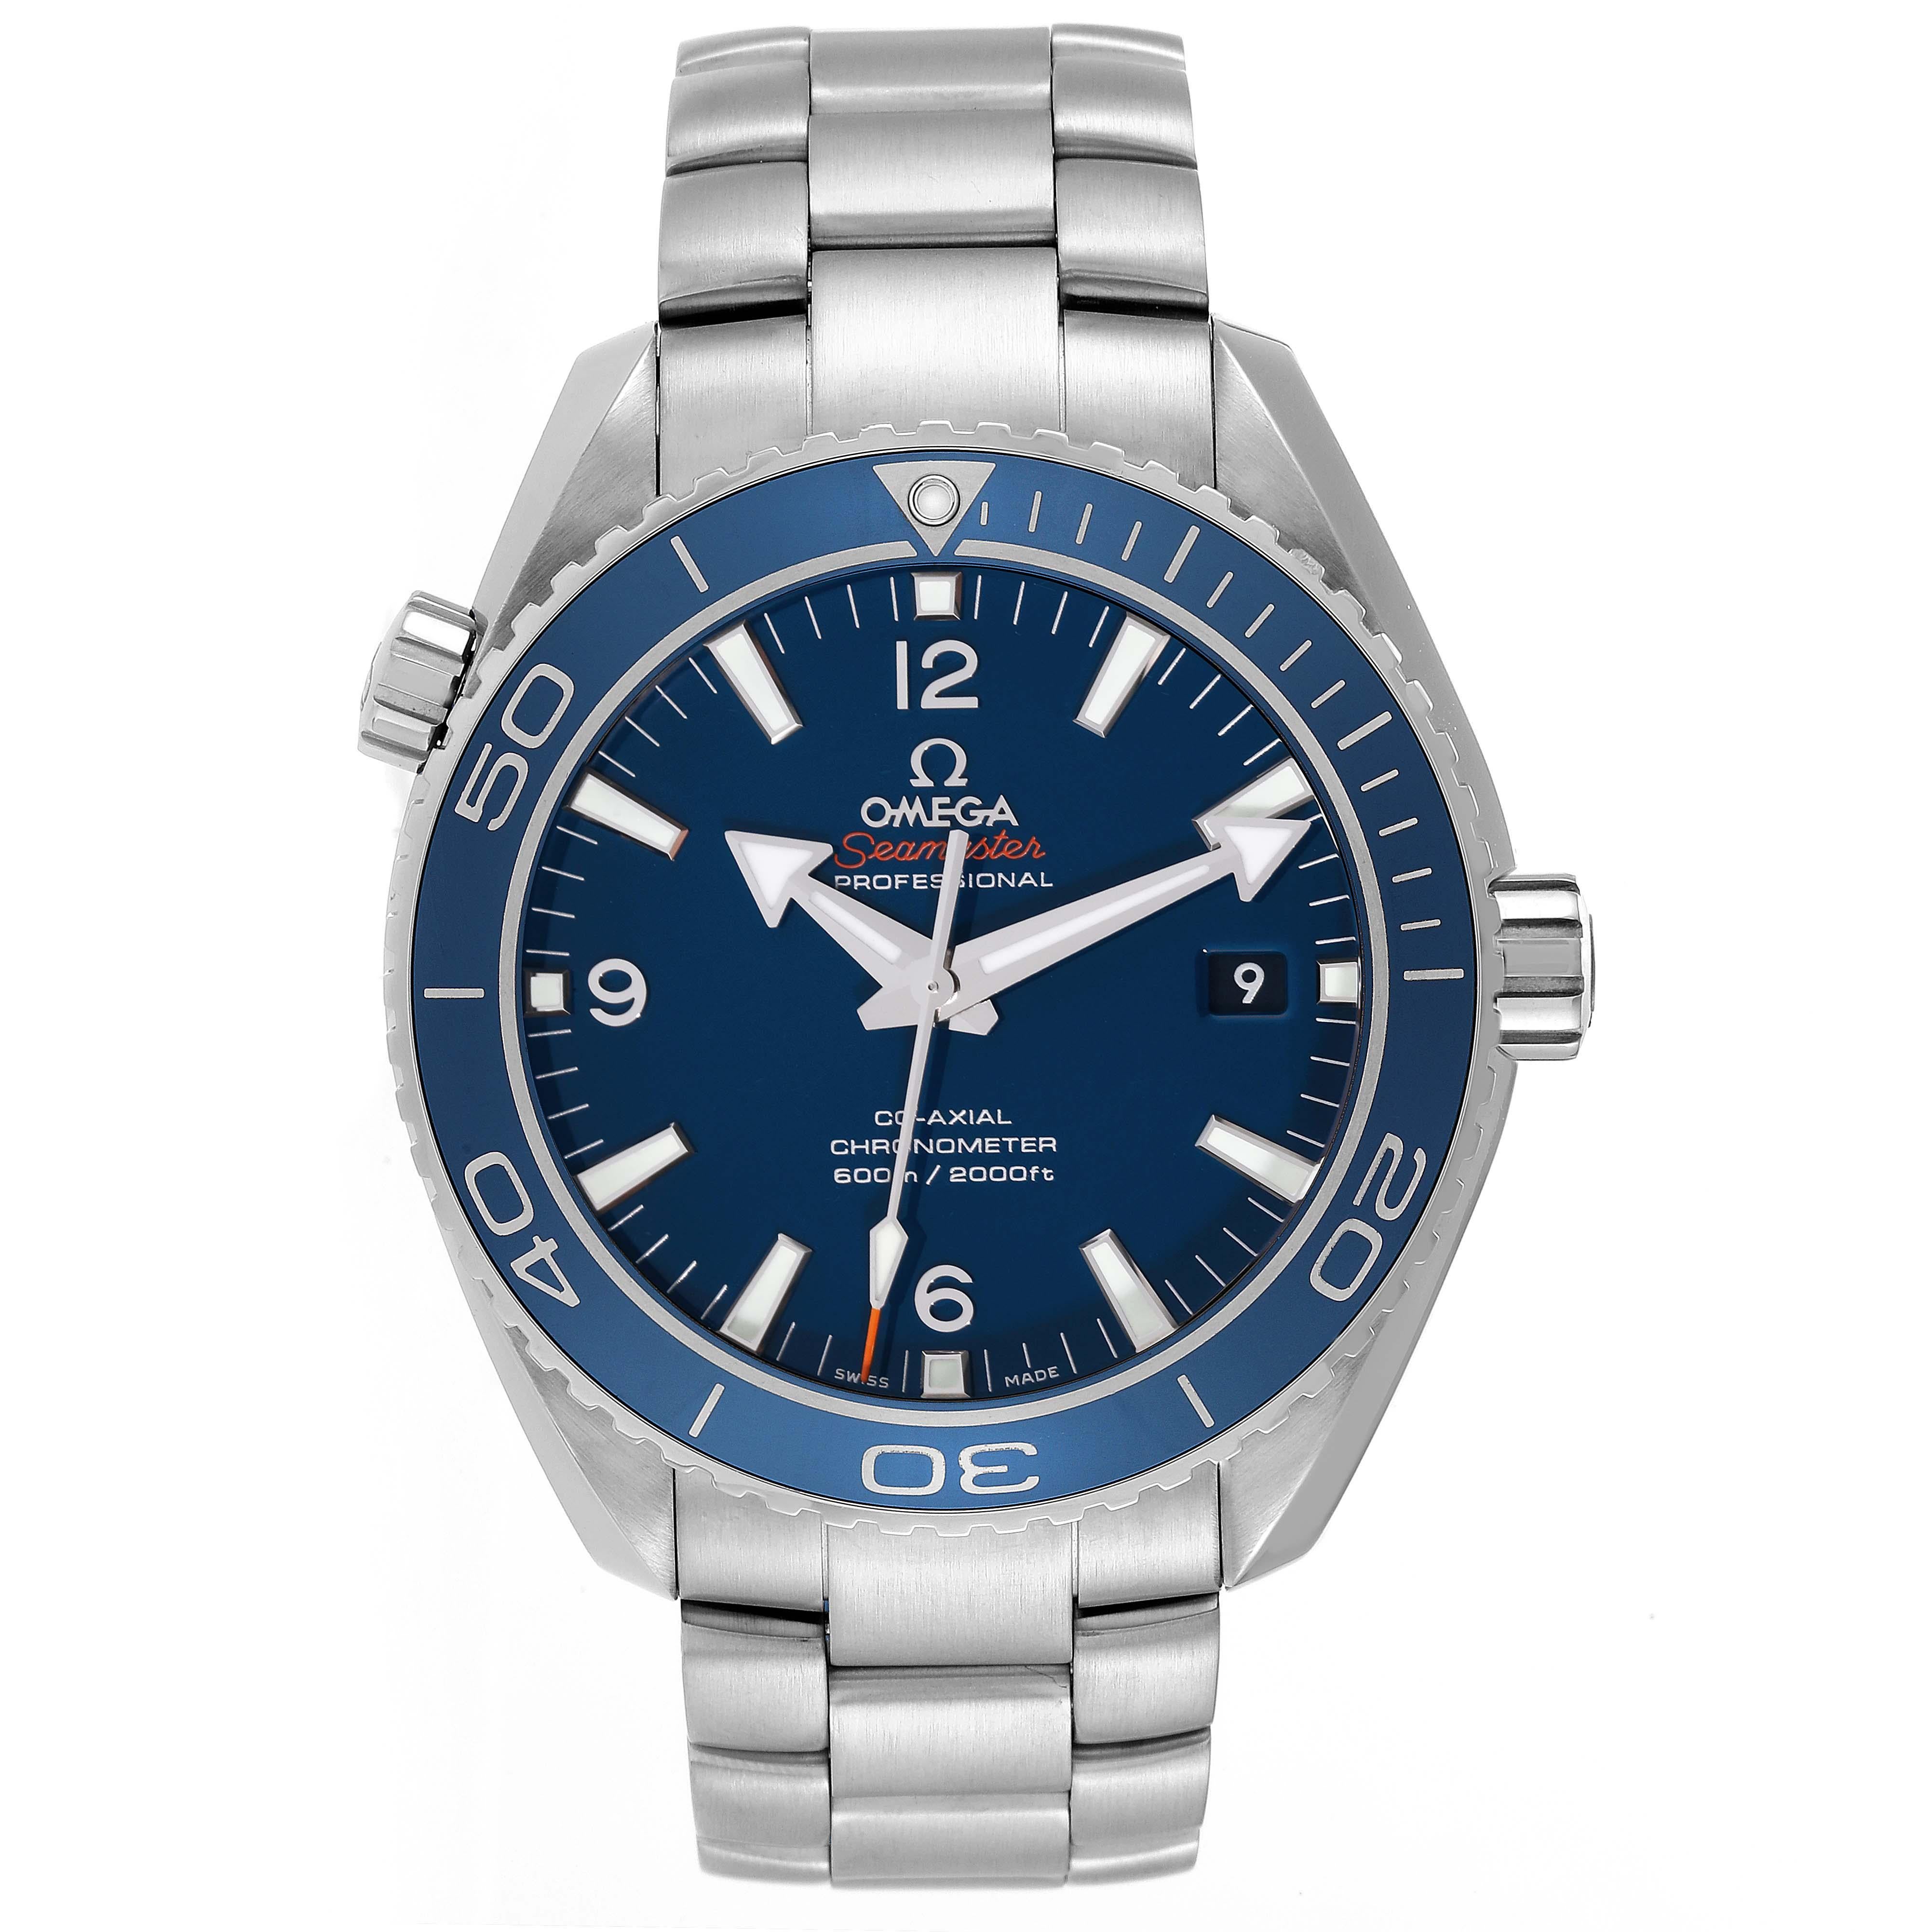 Omega Seamaster Planet Ocean Titanium Mens Watch 232.90.46.21.03.001 Box Card. Automatic self-winding chronometer movement with Co-Axial Escapement. Free sprung-balance, 2 barrels mounted in series, automatic winding in both directions to reduce